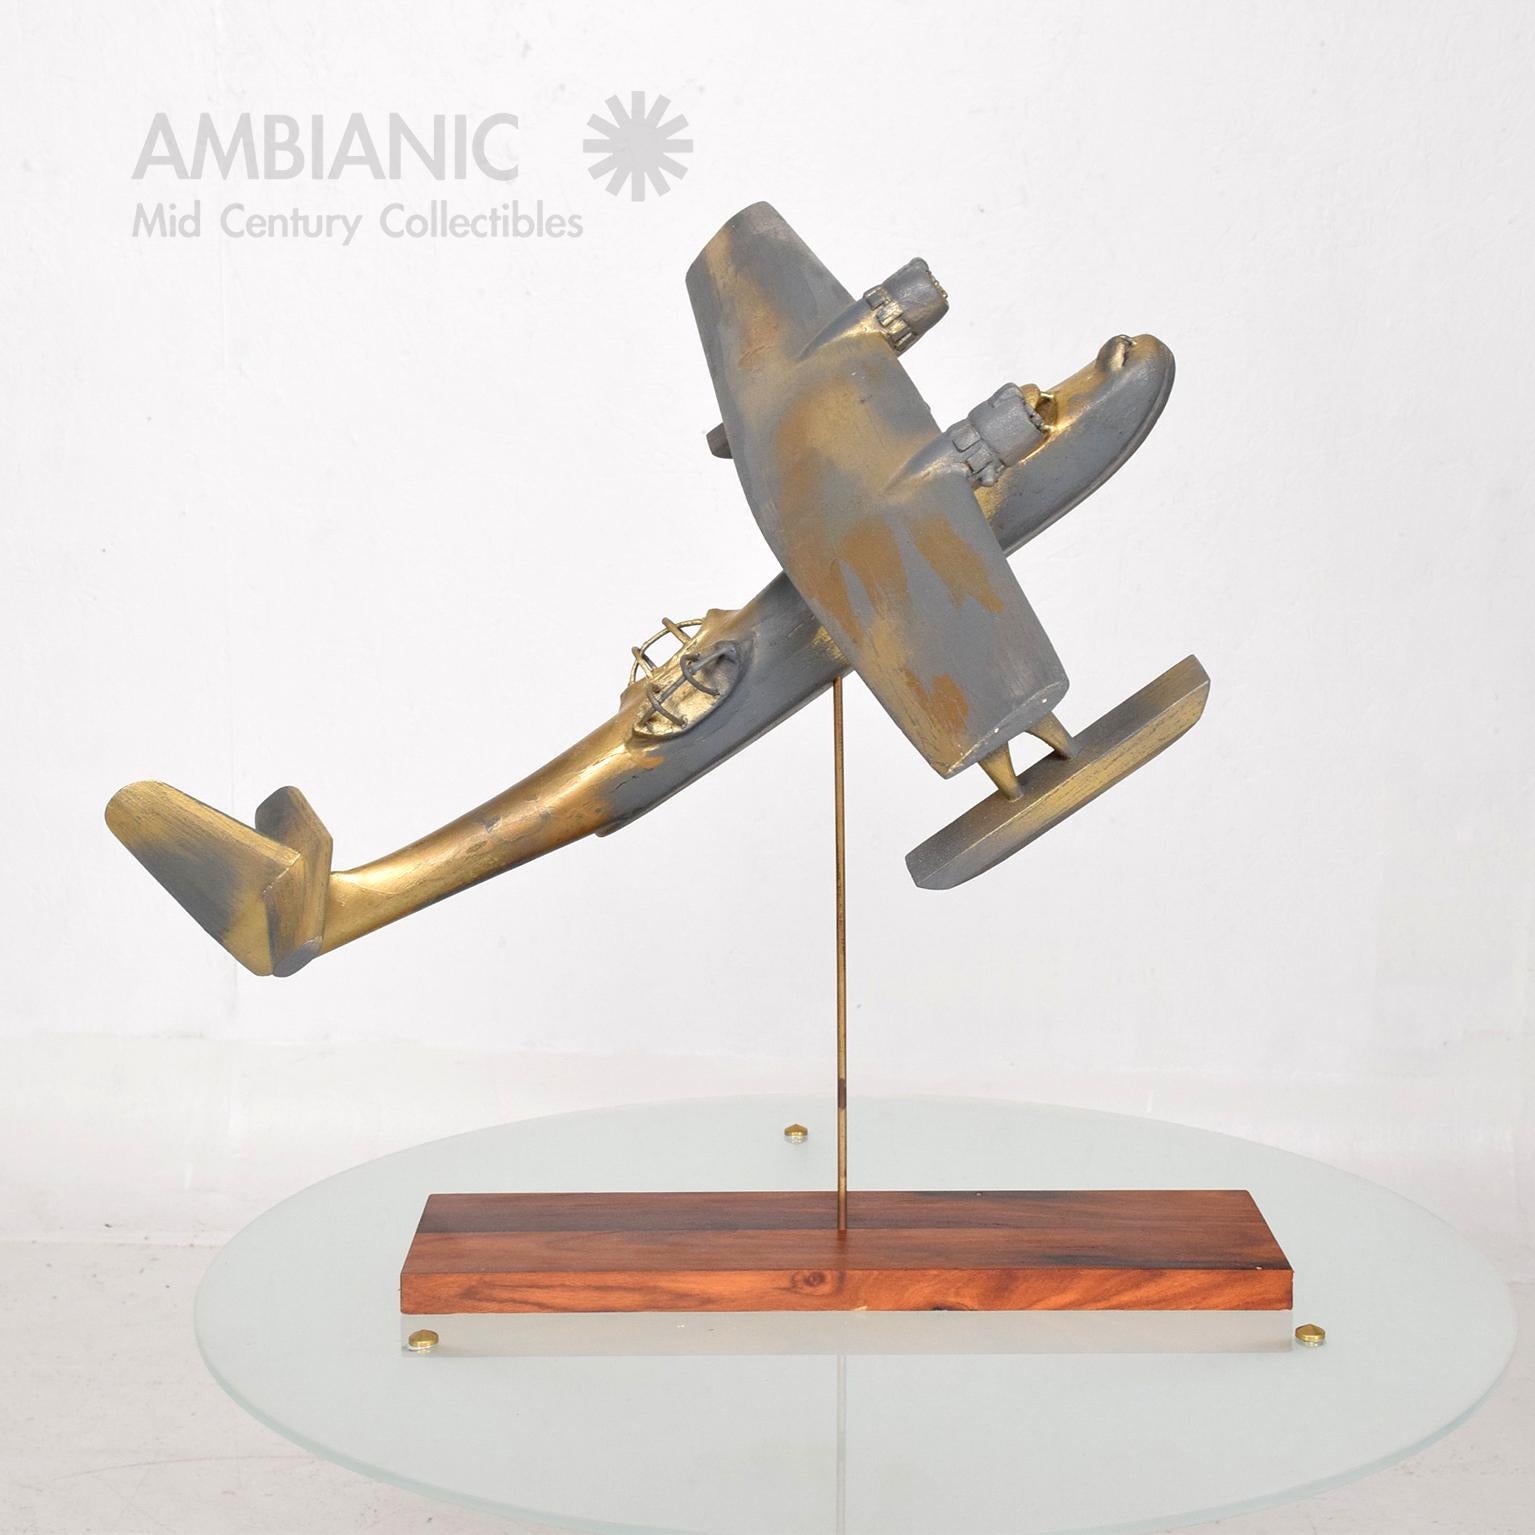 Airplane Art
Vintage WWII wood Airplane sculpture mounted on a brass rod with rosewood base. Fabulous faux Patina.
No information on maker.
Dimensions: 18 3/8